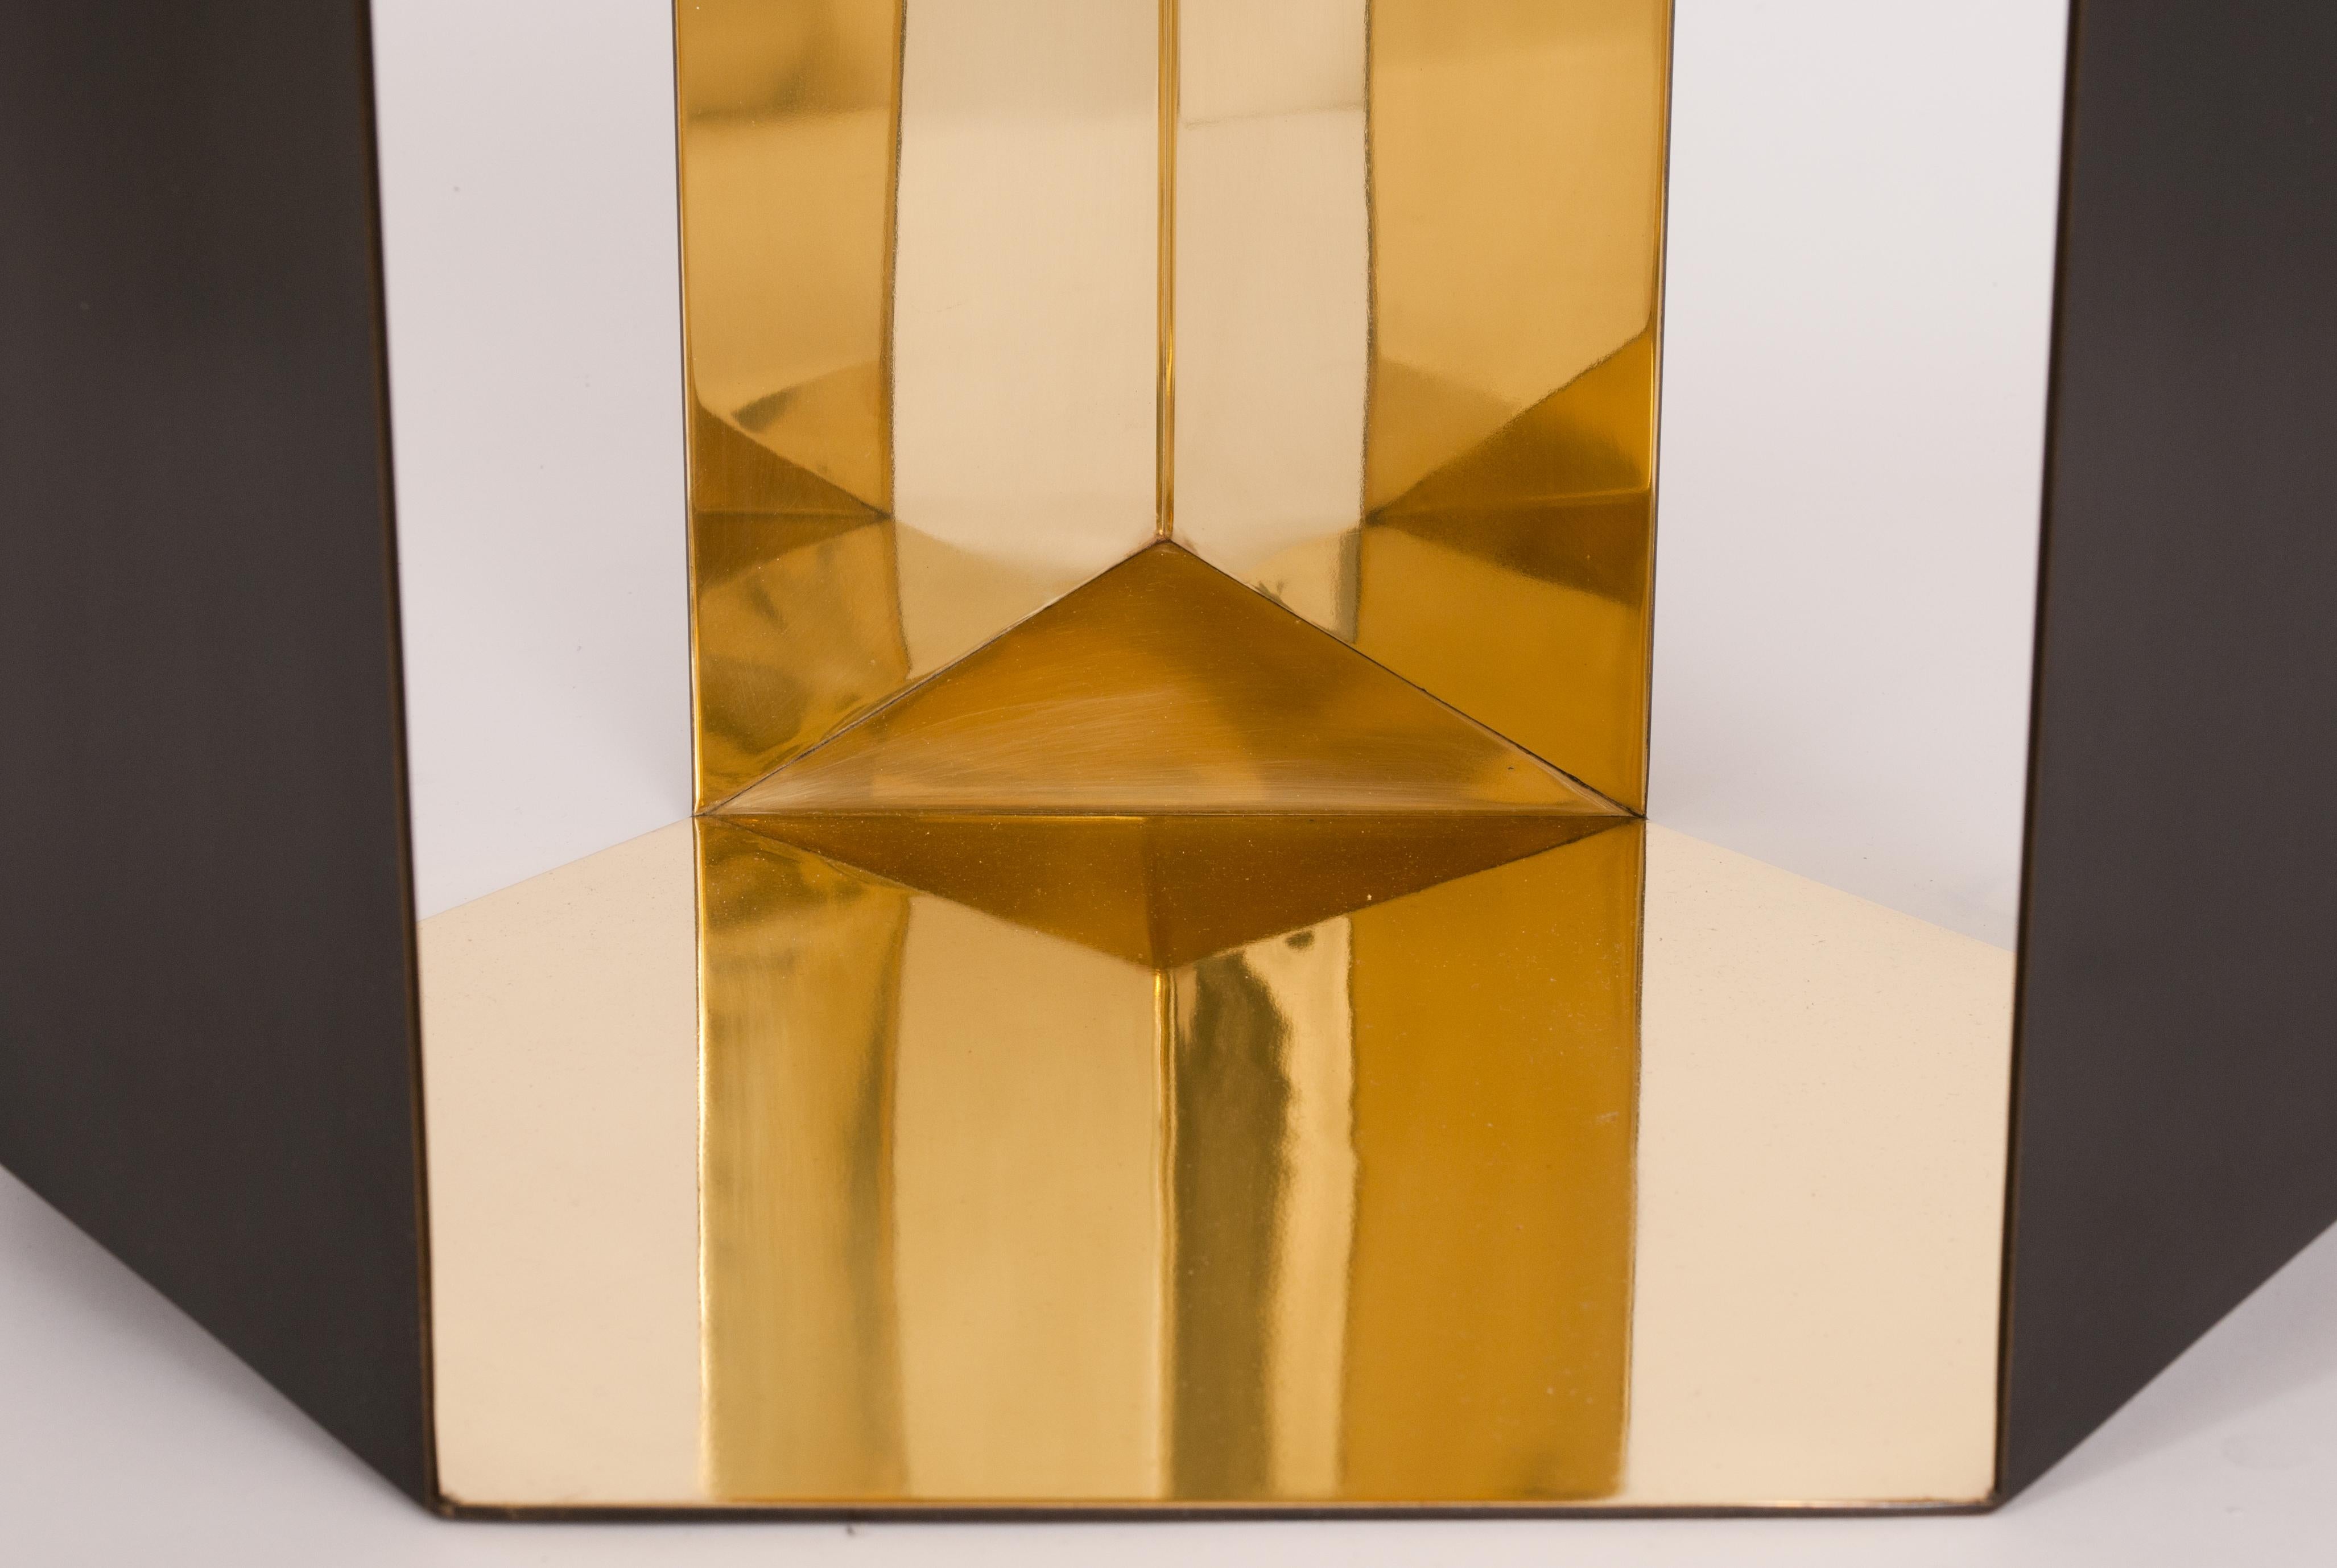 Inspired by folding paper and realized in sheet metal, this table's shape has a bold geometric design that is distinct in any application. The origami cocktail table has an exterior antiqued hand-rubbed patina finish and mirrored interior finish.